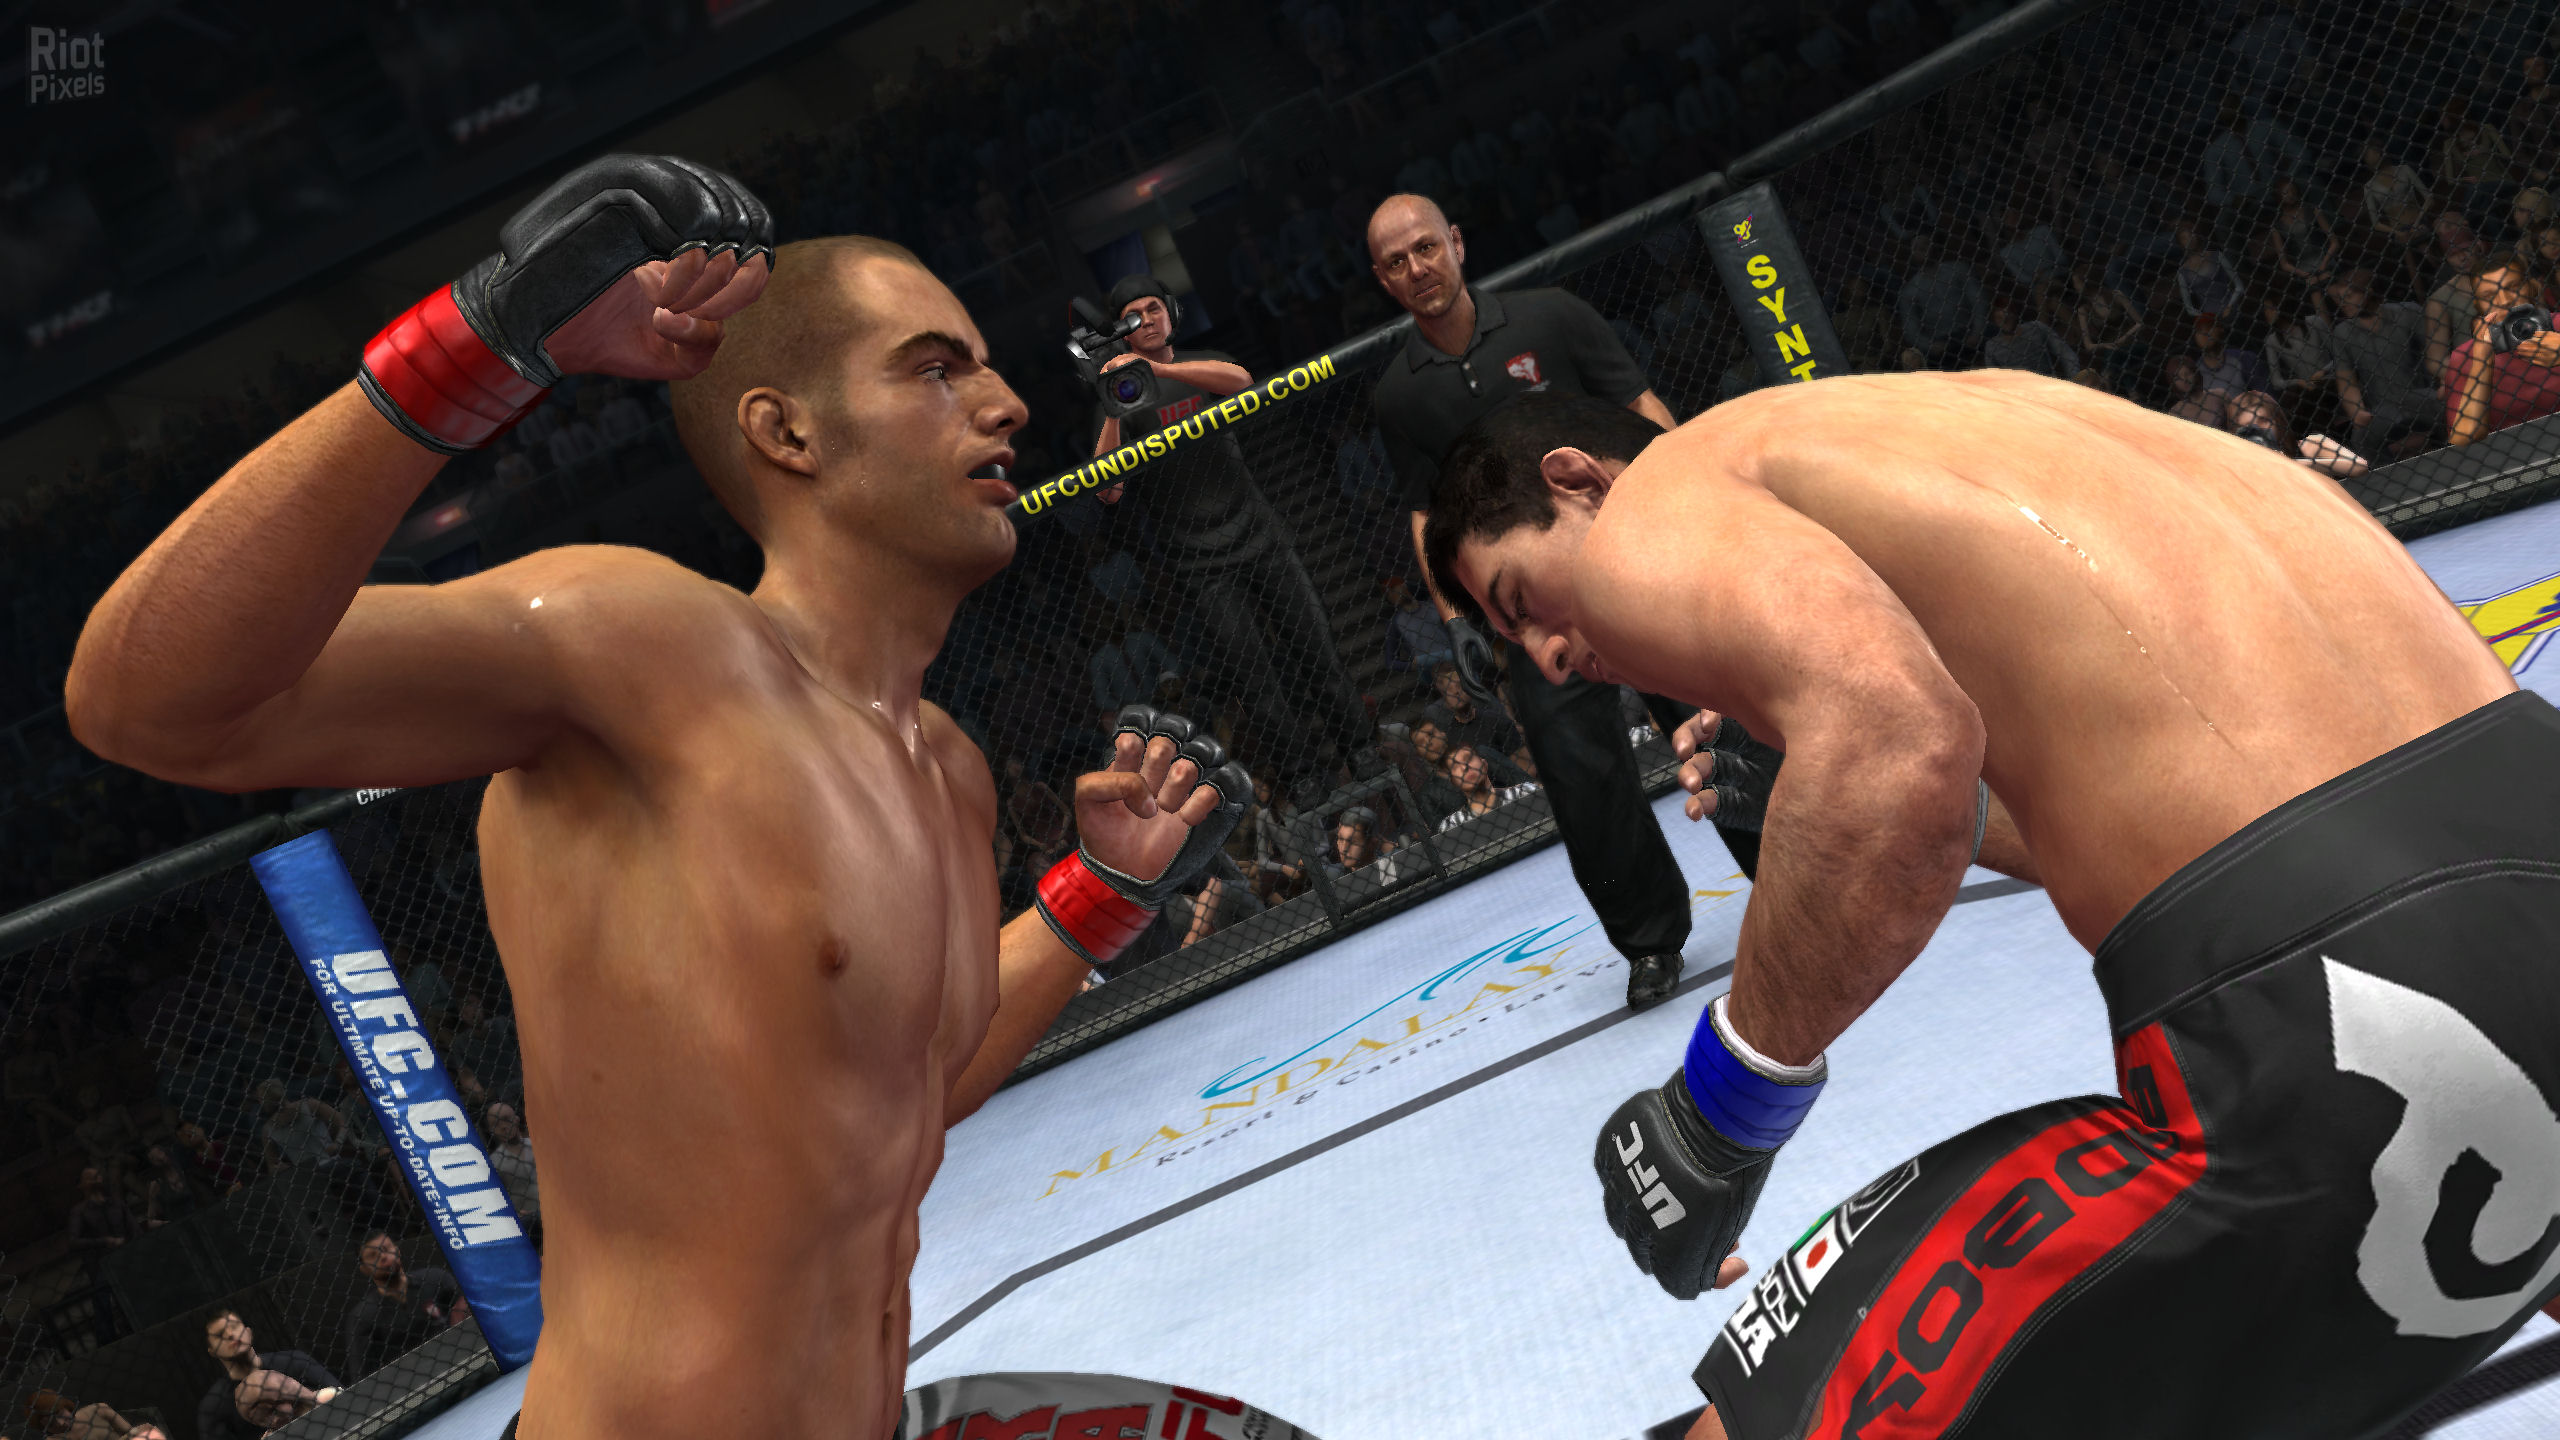 ufc game download for pc